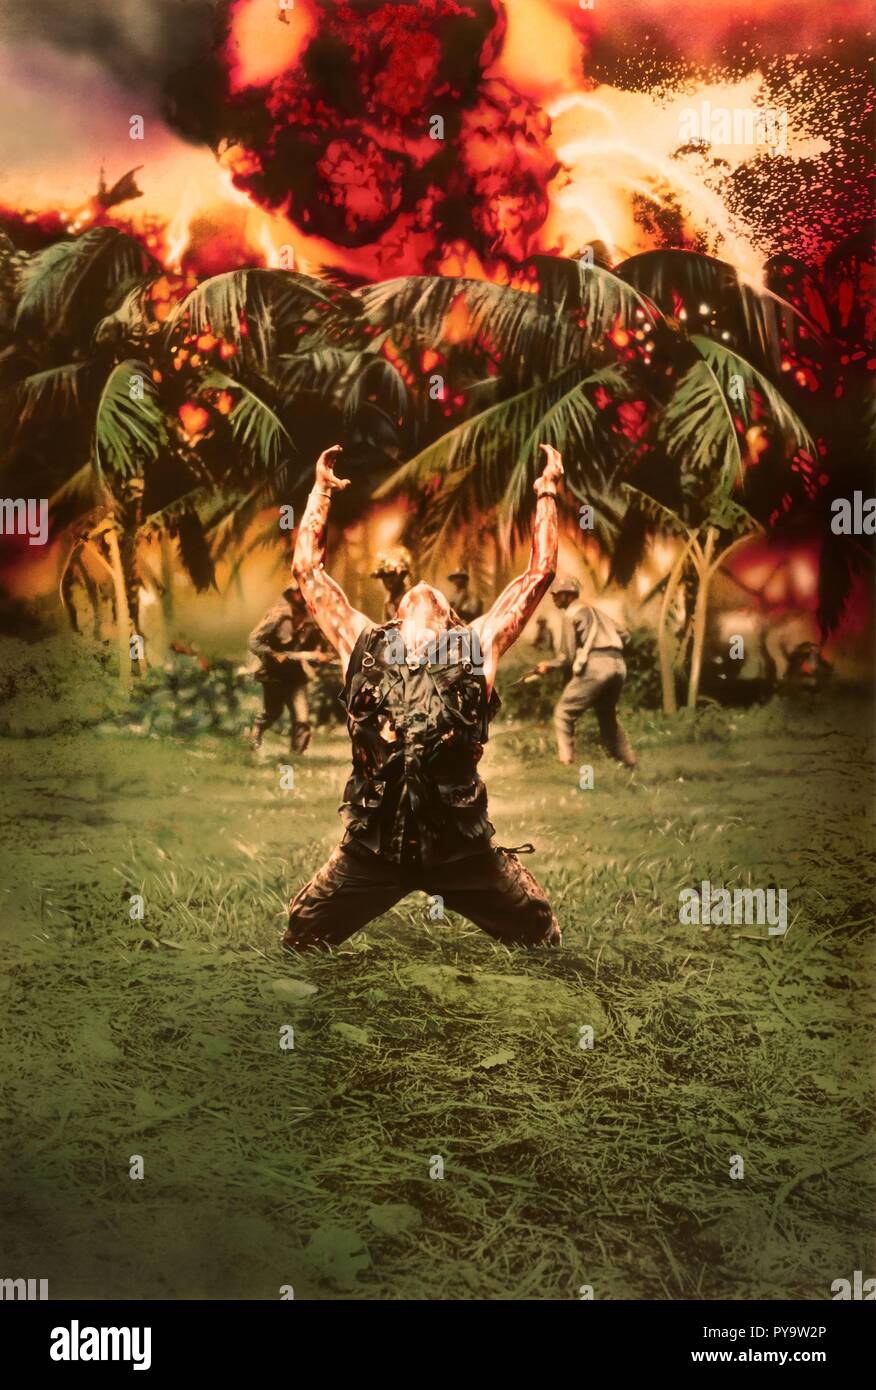 Original film title: PLATOON. English title: PLATOON. Year: 1986. Director: OLIVER STONE. Credit: ORION PICTURES / Album Stock Photo